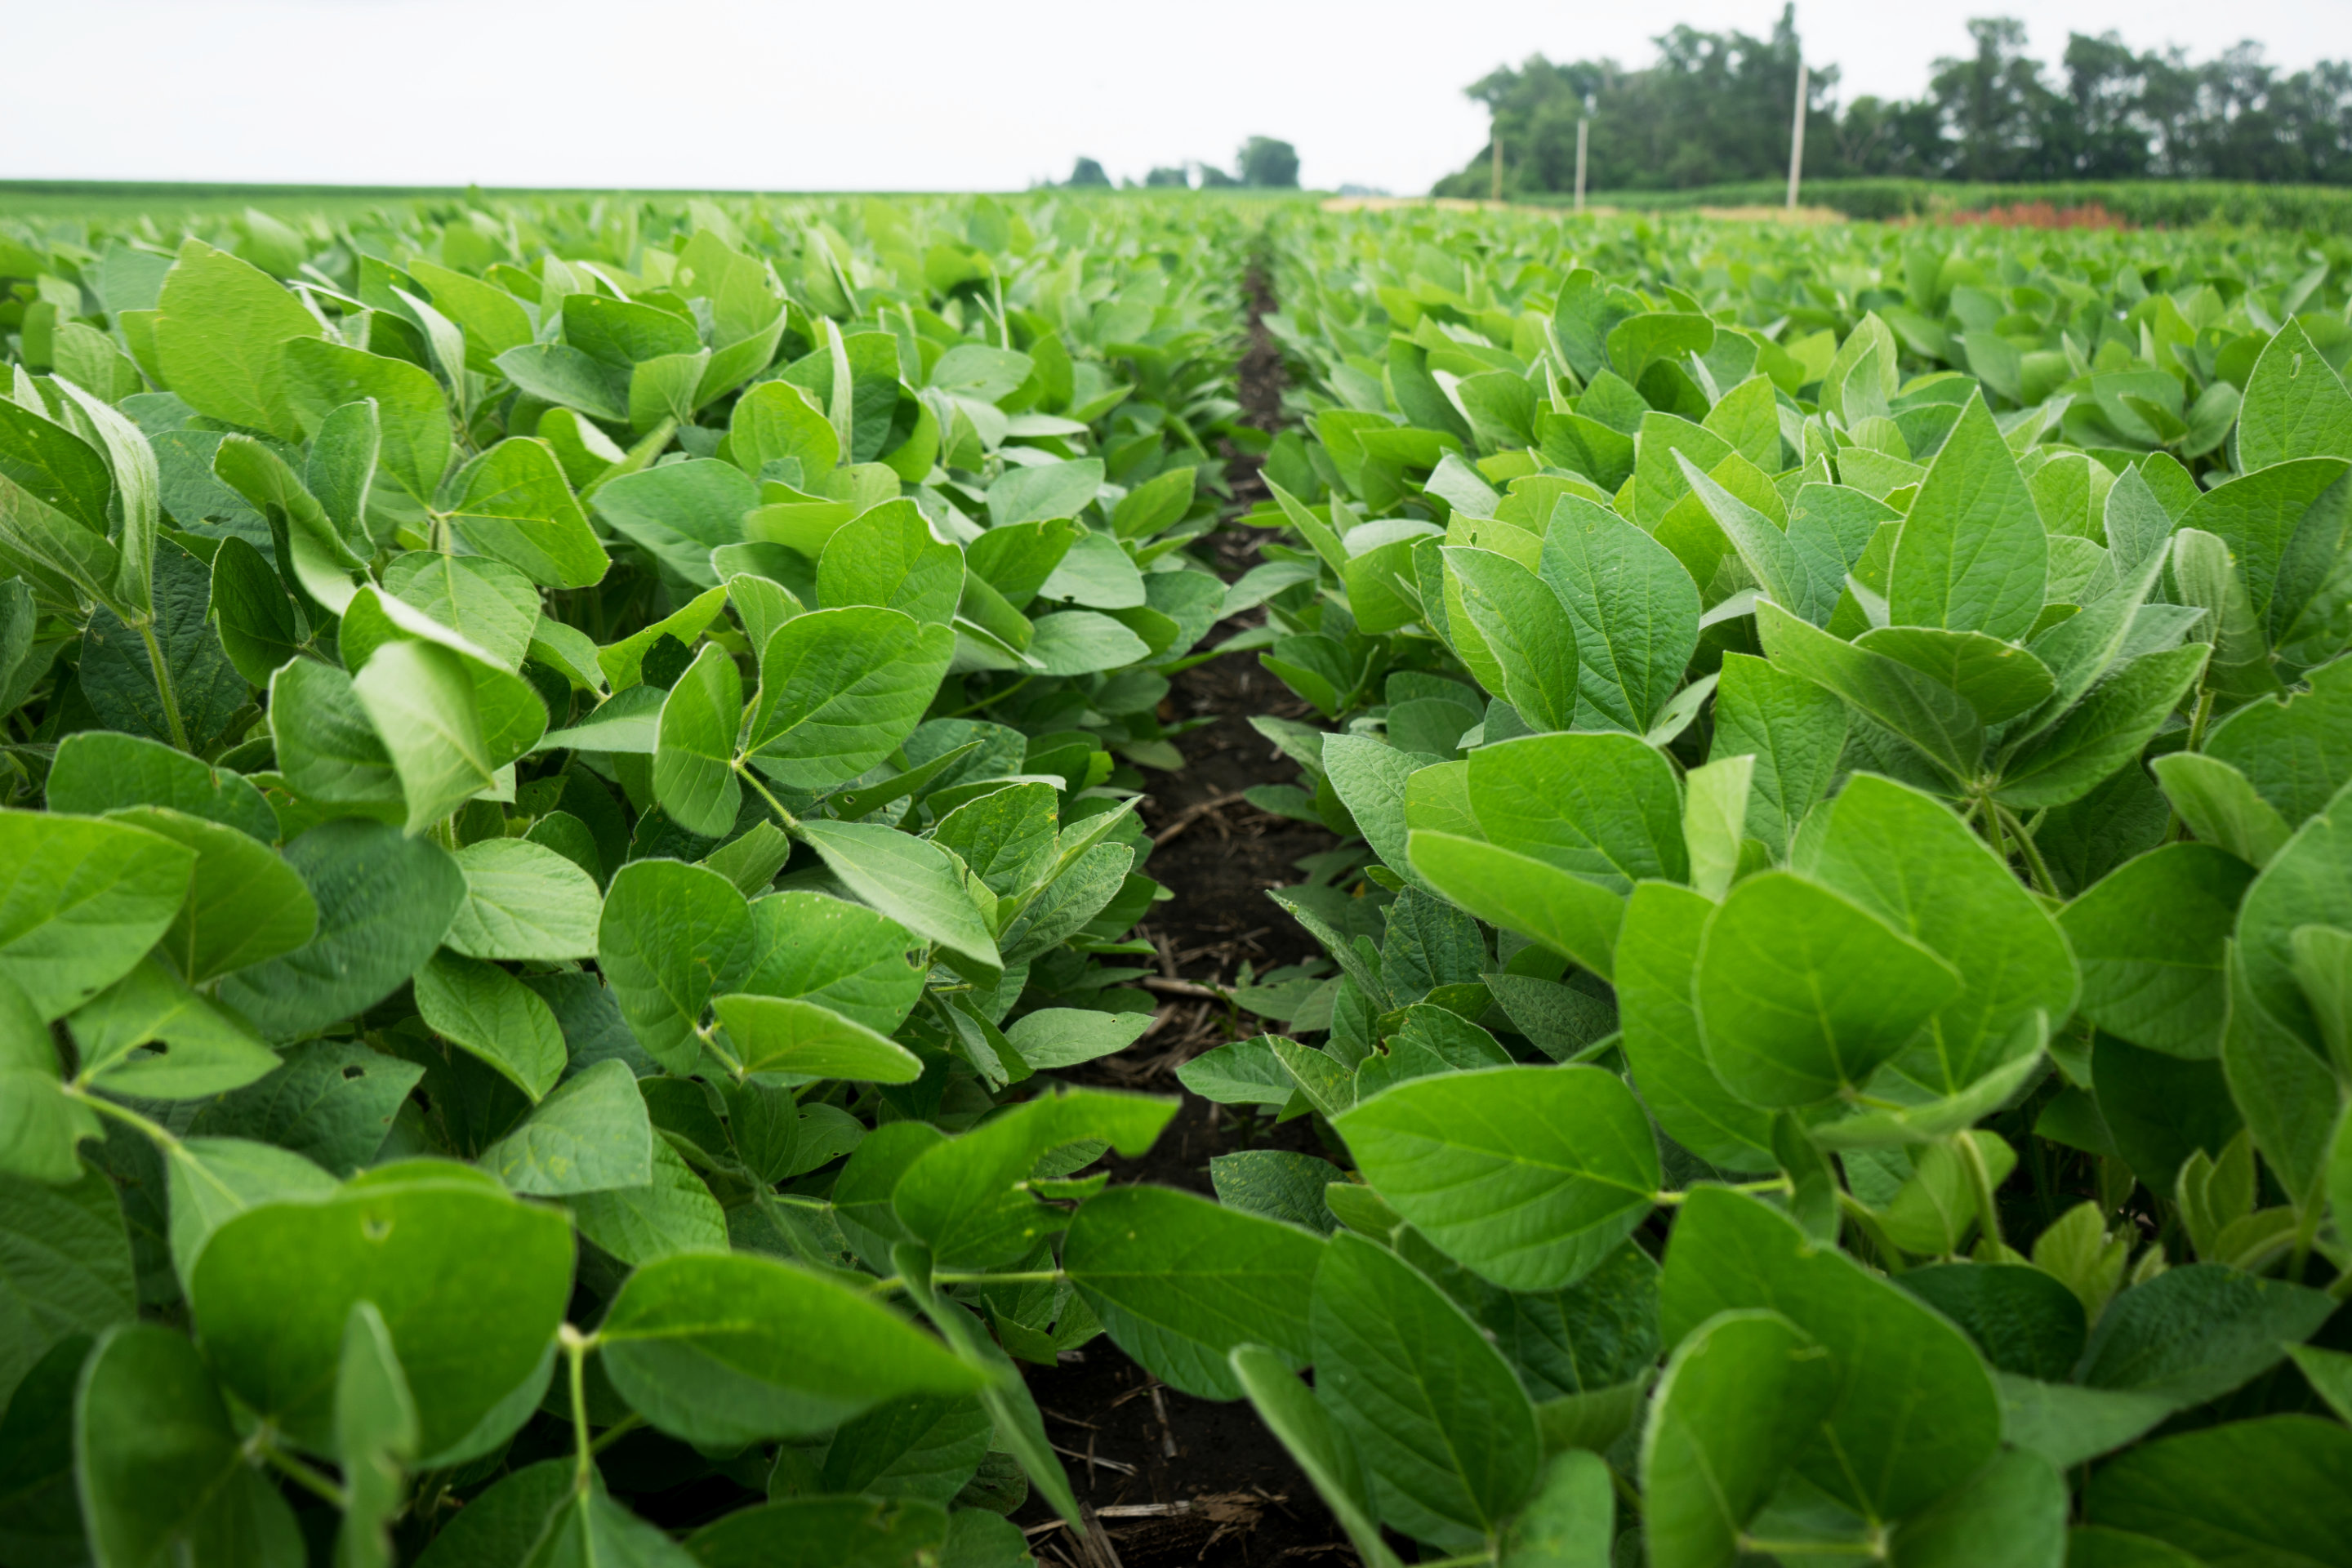 Young soybean plants growing in a soybean field